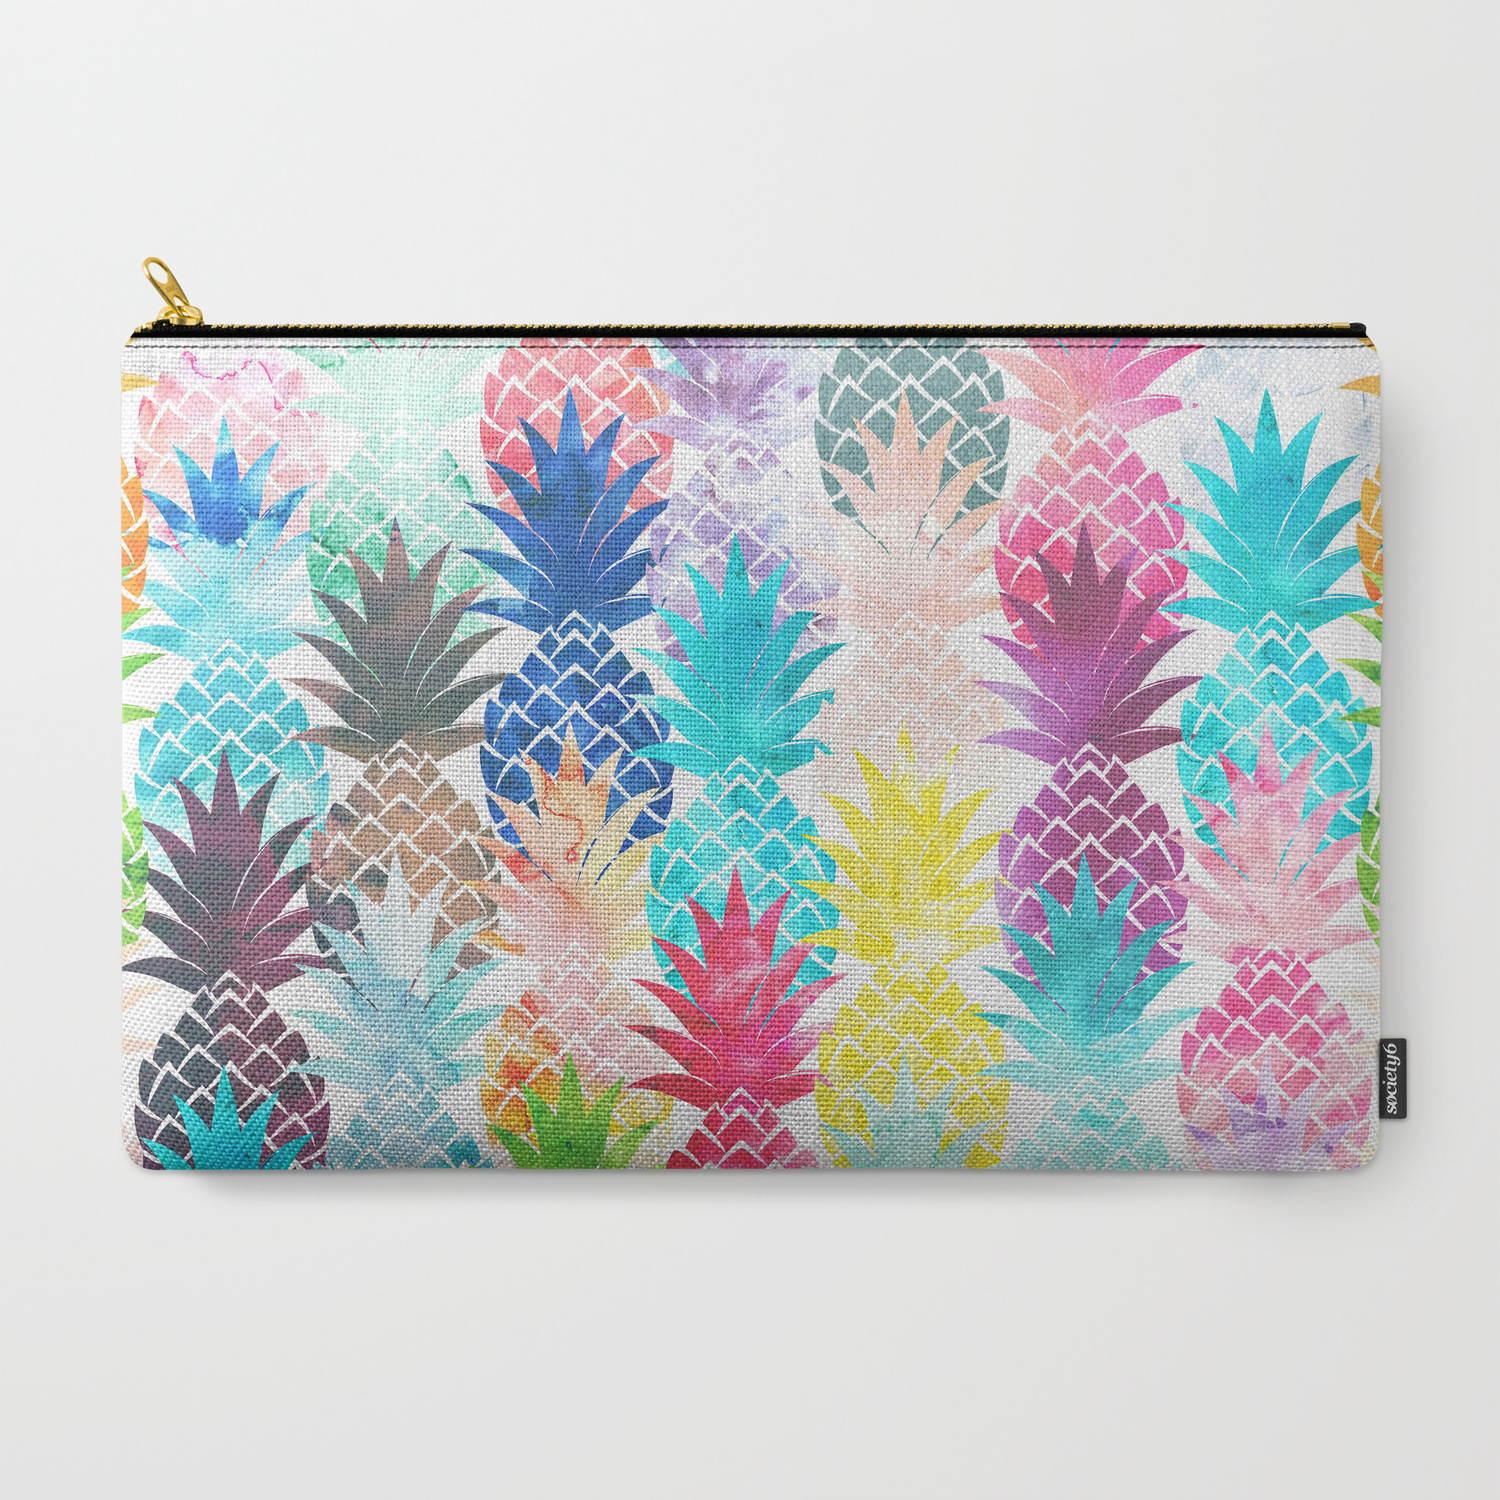 Society6 Hawaiian Pineapple Pattern Tropical Watercolor by Girly Trend by Audrey Chenal on Rectangular Pillow